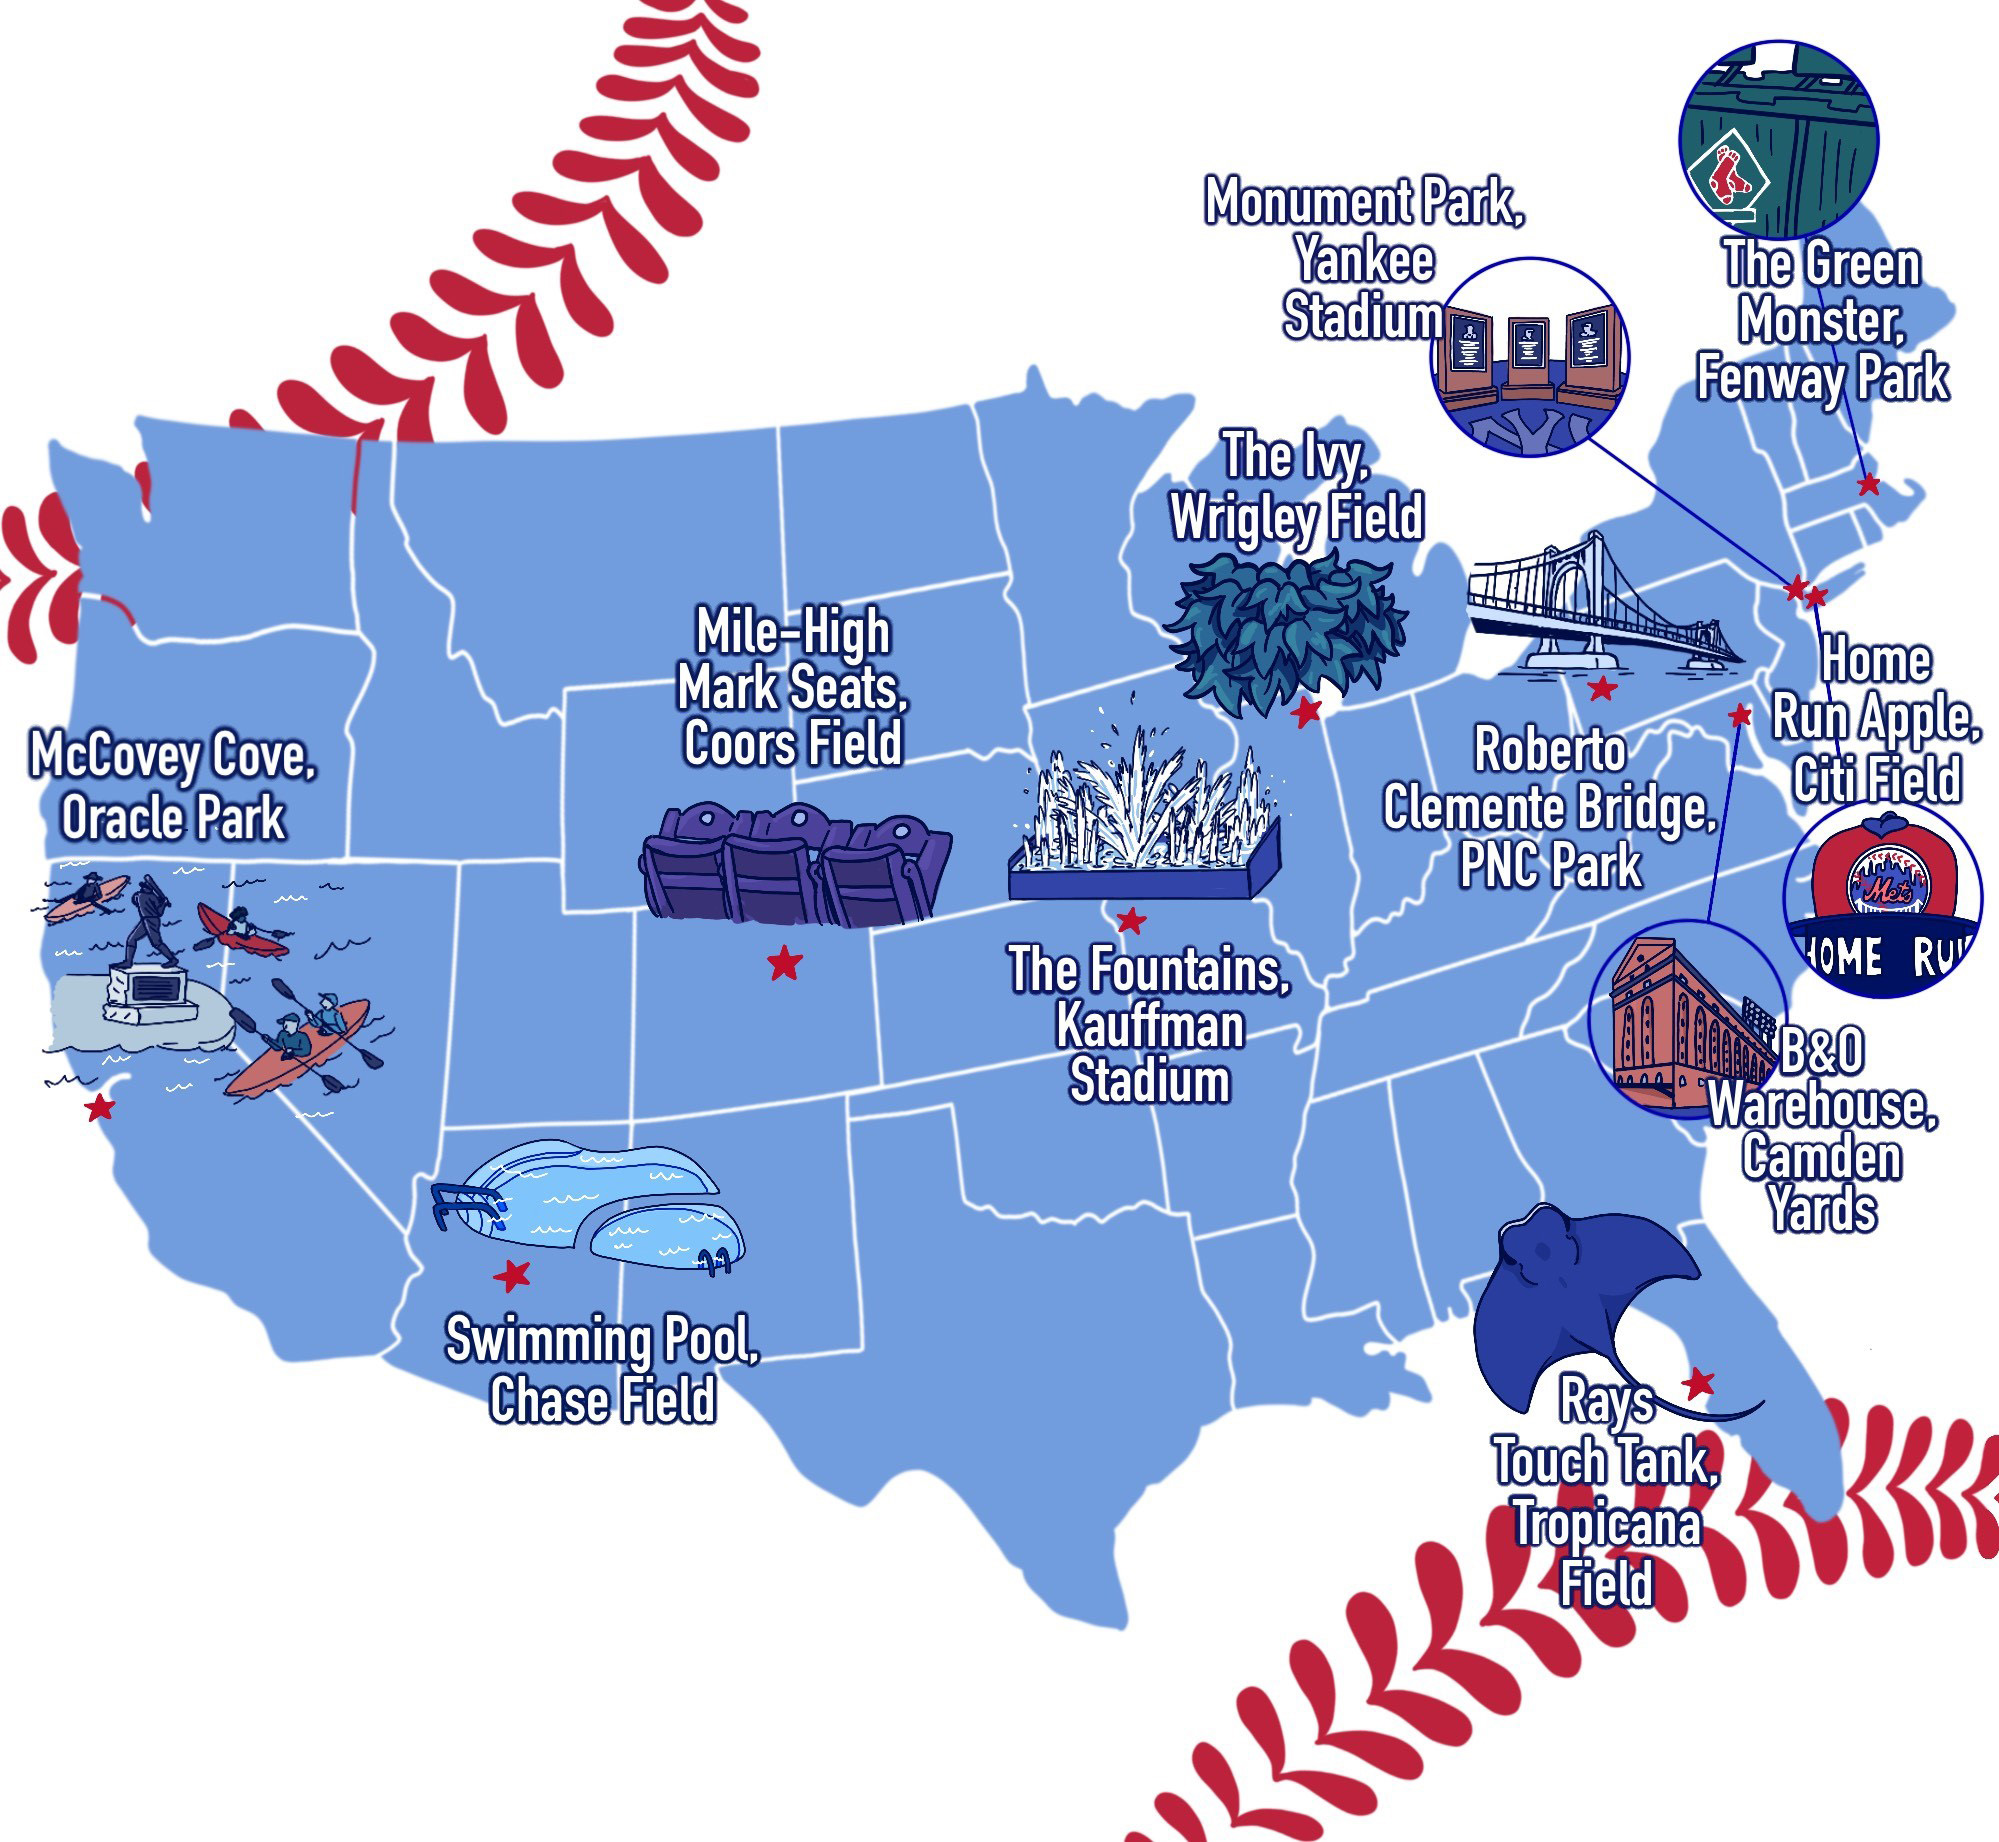 The Most Iconic Baseball Stadium Features Your Aaa Network